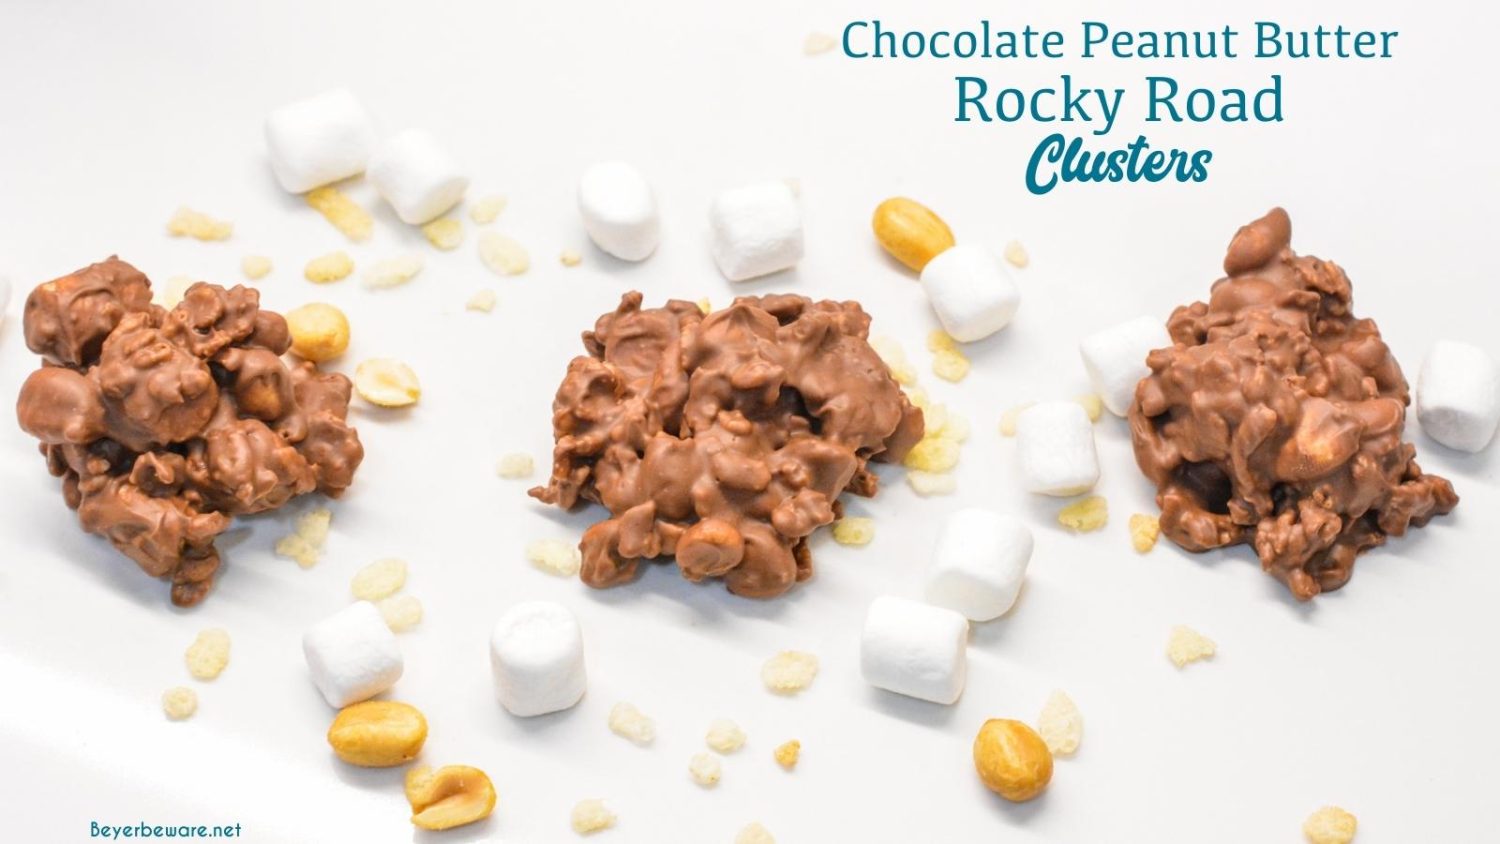 Chocolate peanut butter rock road clusters combine peanut, marshmallows, and rice krispies with melted dark and white chocolate and peanut butter for over-the-top peanut clusters.